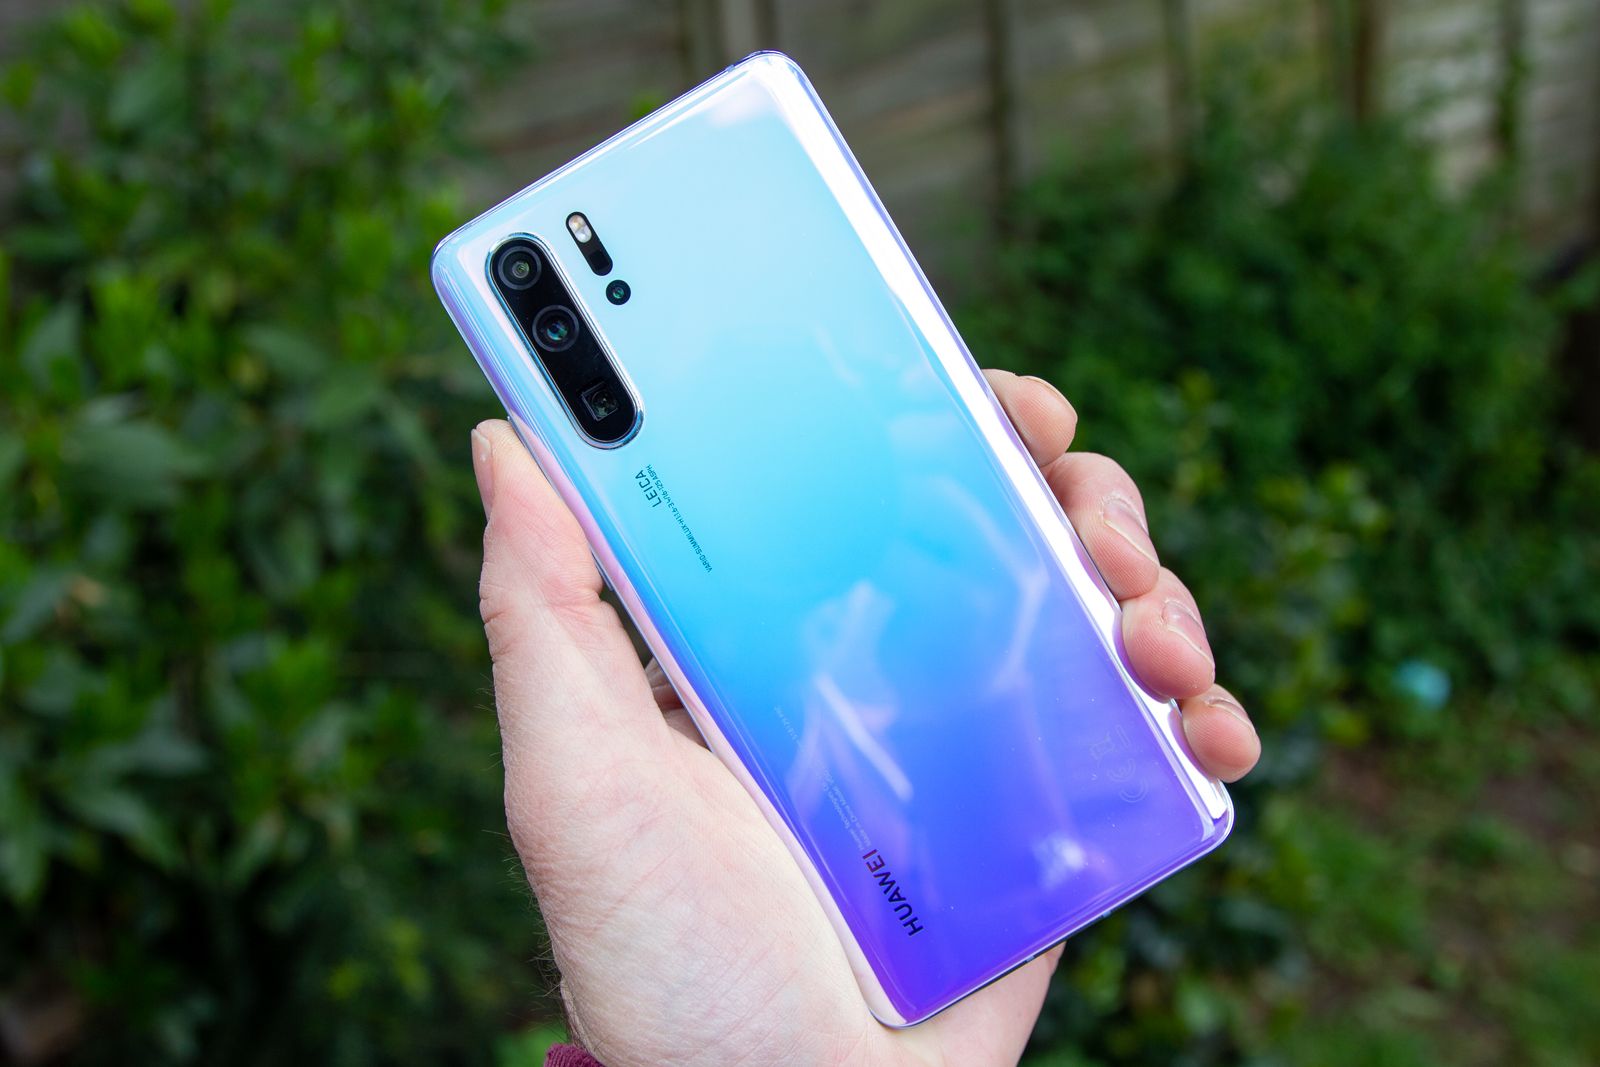 dual triple quad camera smartphones the history running through to the samsung galaxy s10 photo 3